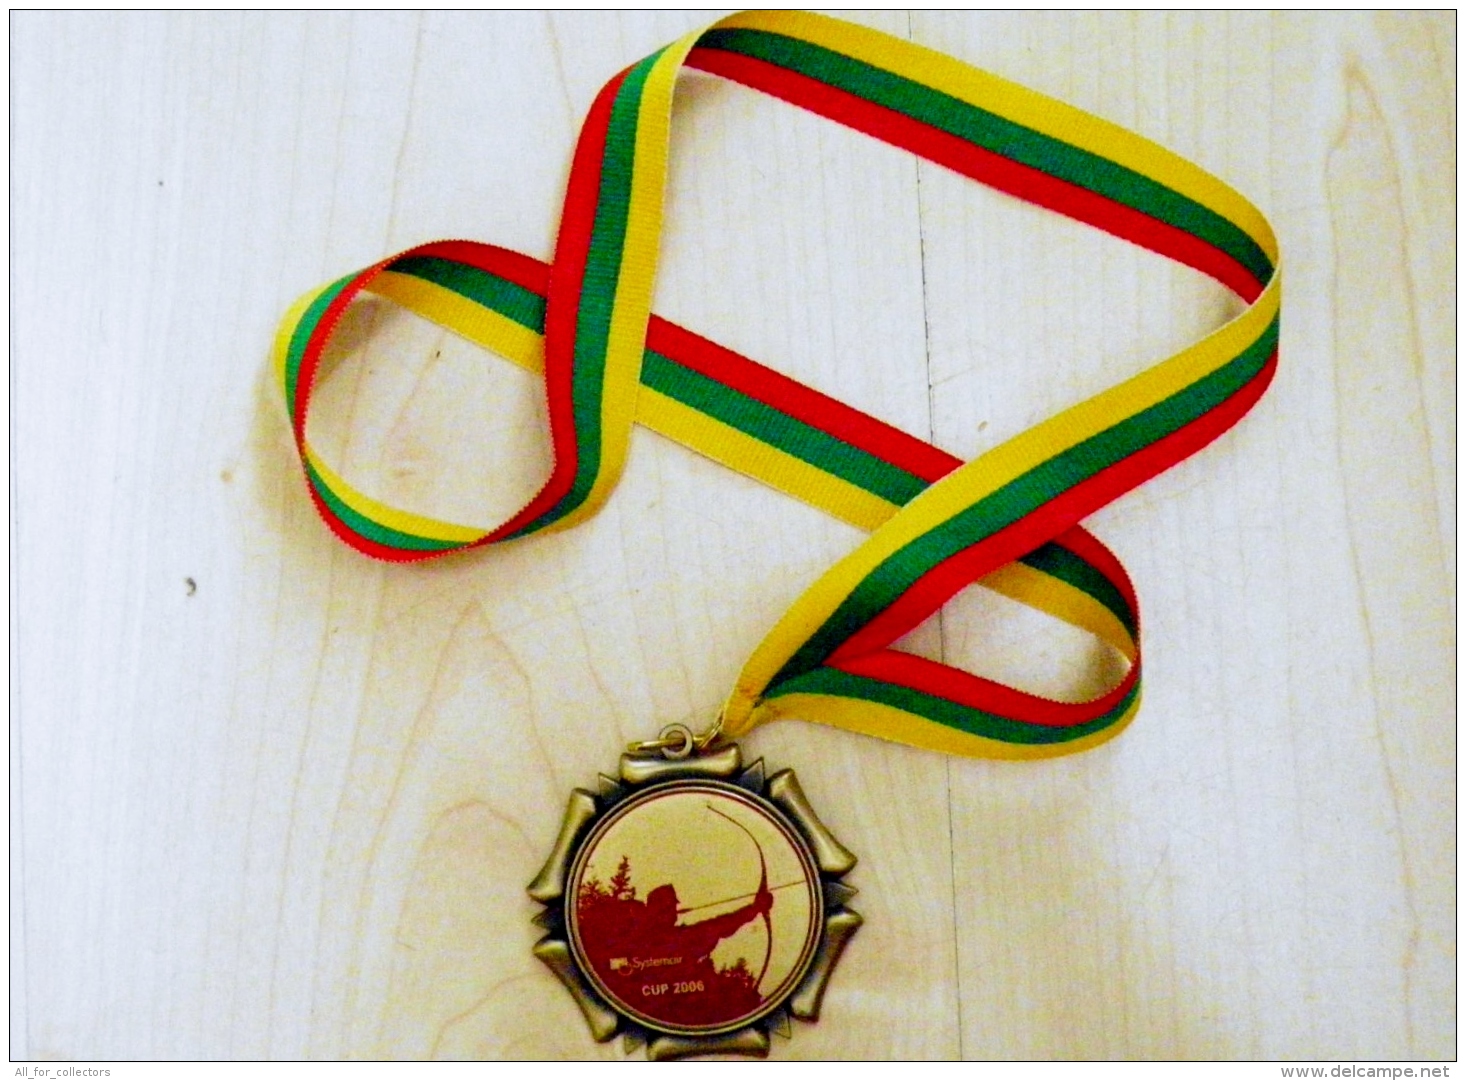 Archery Shooting Sport Medal From Lithuania Championship 2006 1st Place - Archery